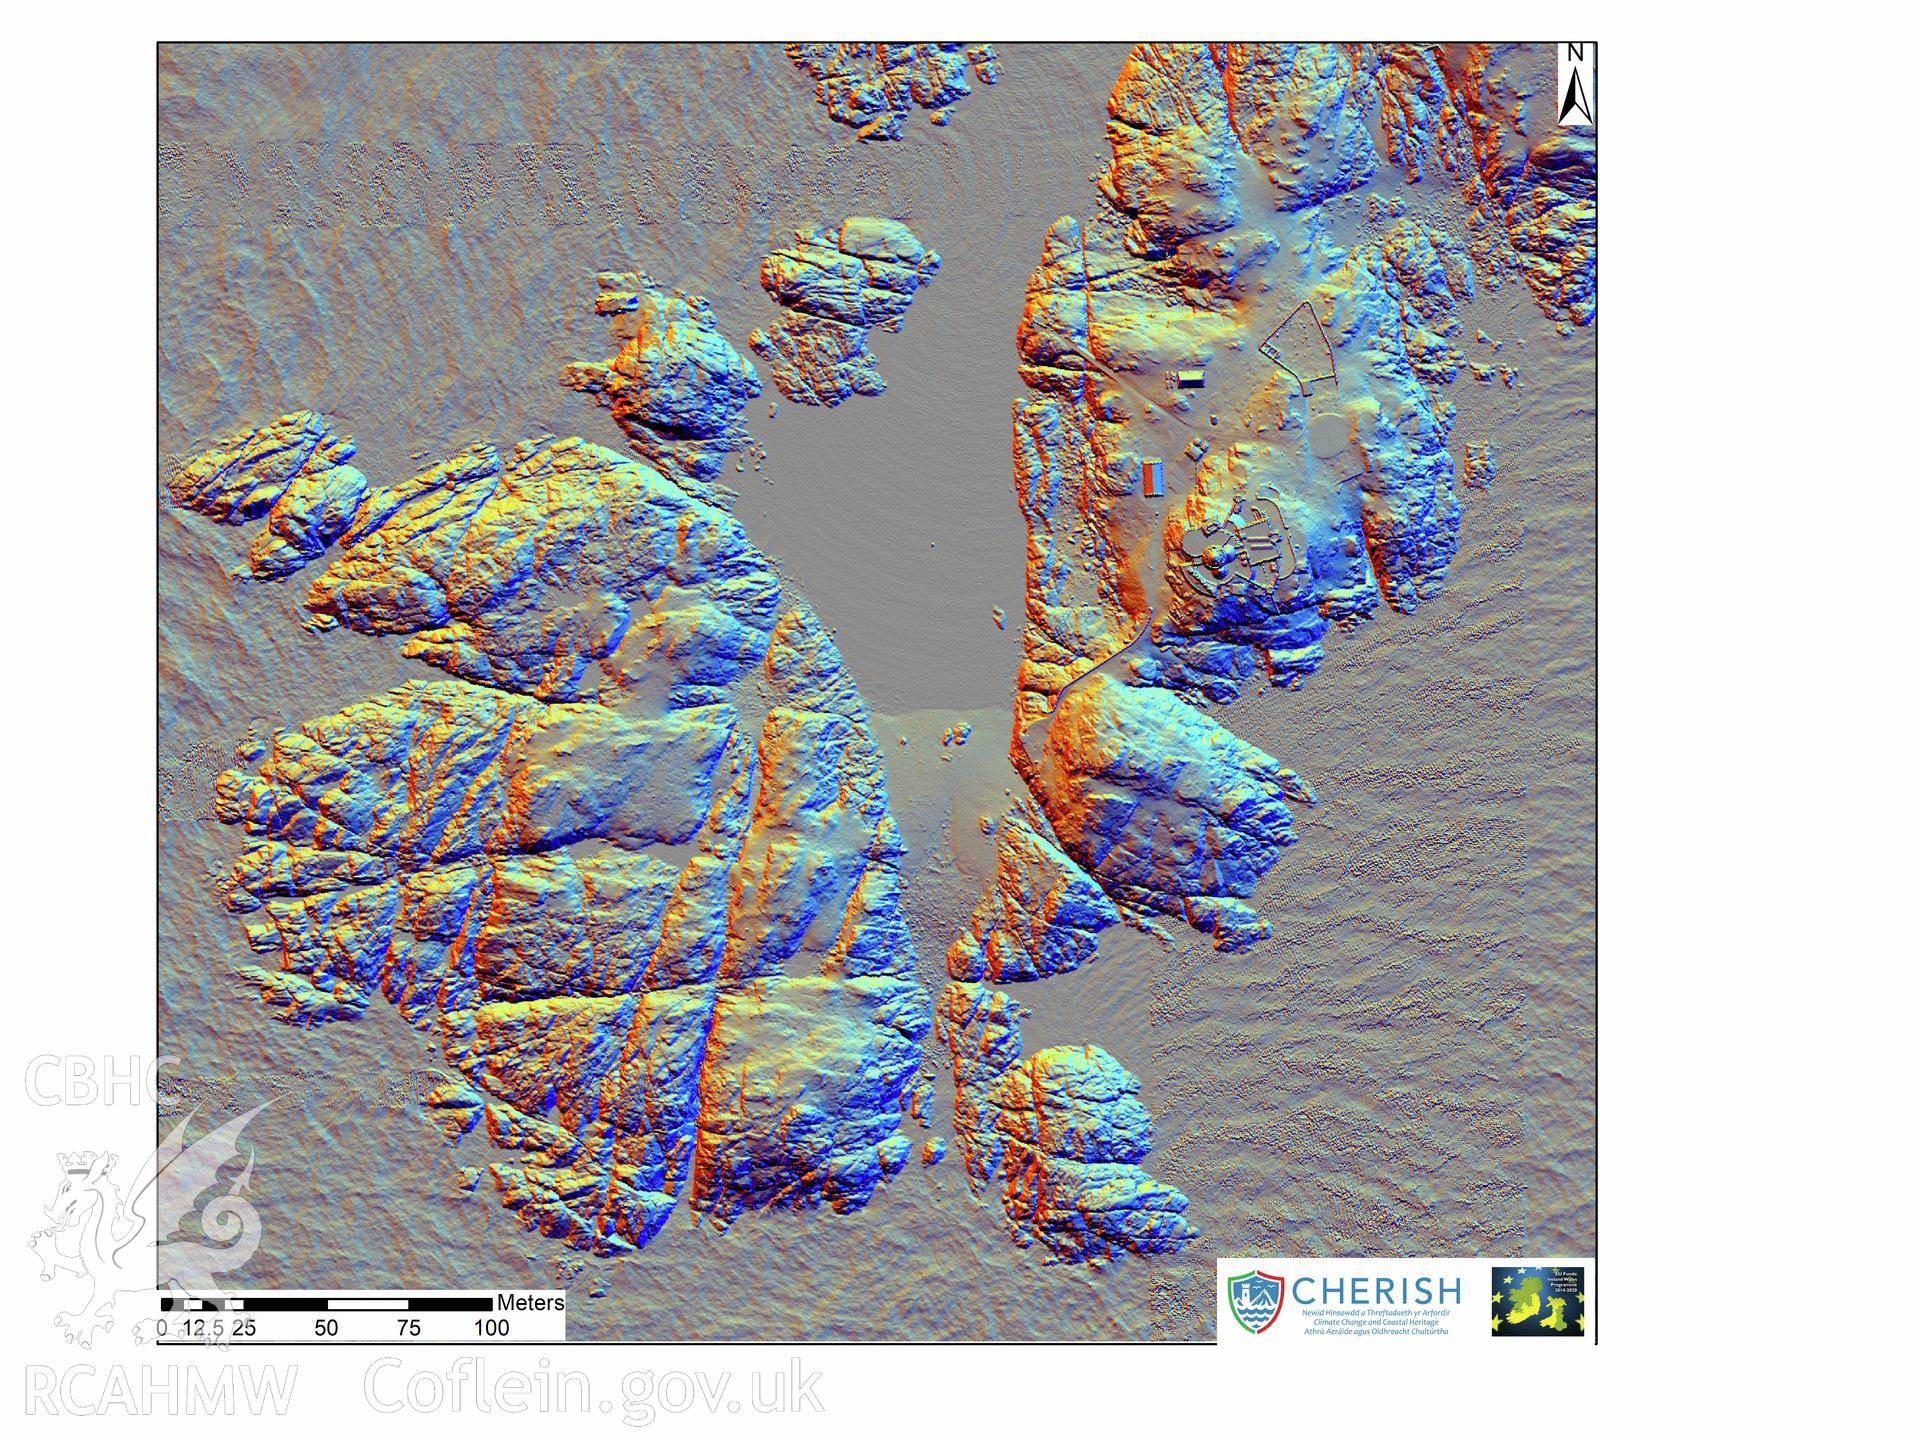 Ynysoedd y Moelrhoniaid (The Skerries Islet). Airborne laser scanning (LiDAR) commissioned by the CHERISH Project 2017-2021, flown by Bluesky International LTD at low tide on the 24th of February 2017. Southern view showing the ploughed fields. This LiDAR reading shows a digital surface model (DSM) with multi hill shading.